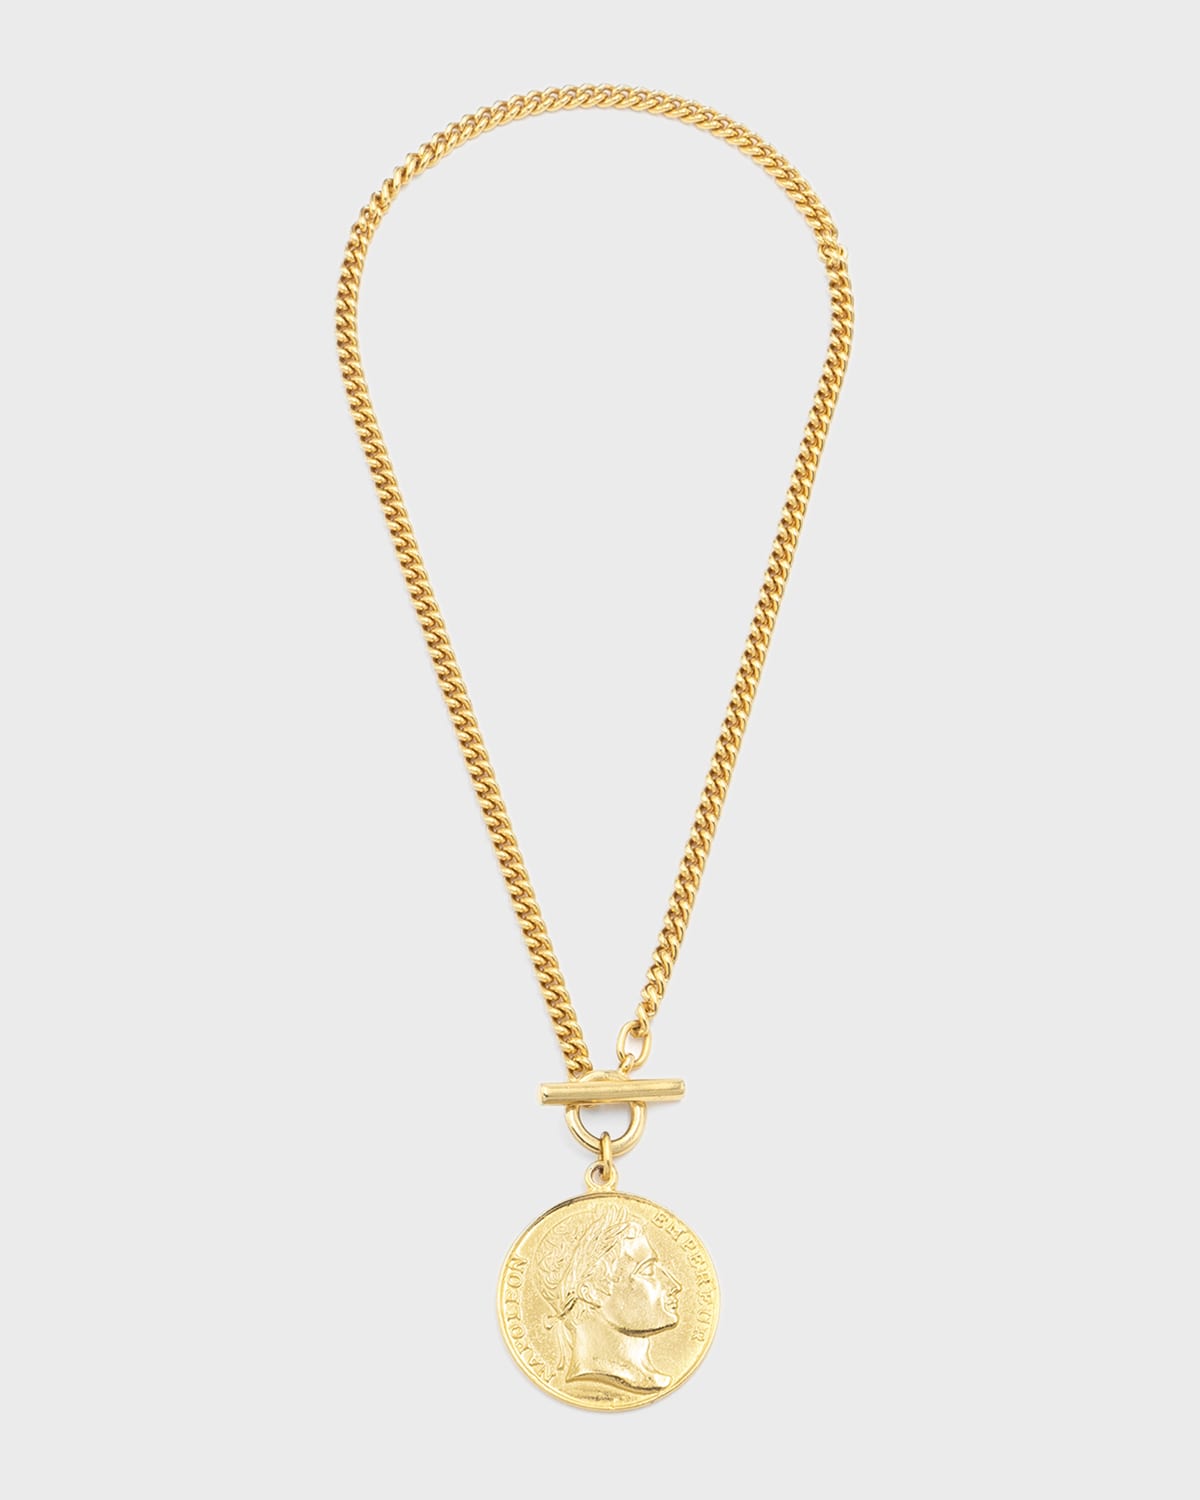 Details about    14k Solid Yellow Gold U.S.A Army Gold Coin Pendant Necklace